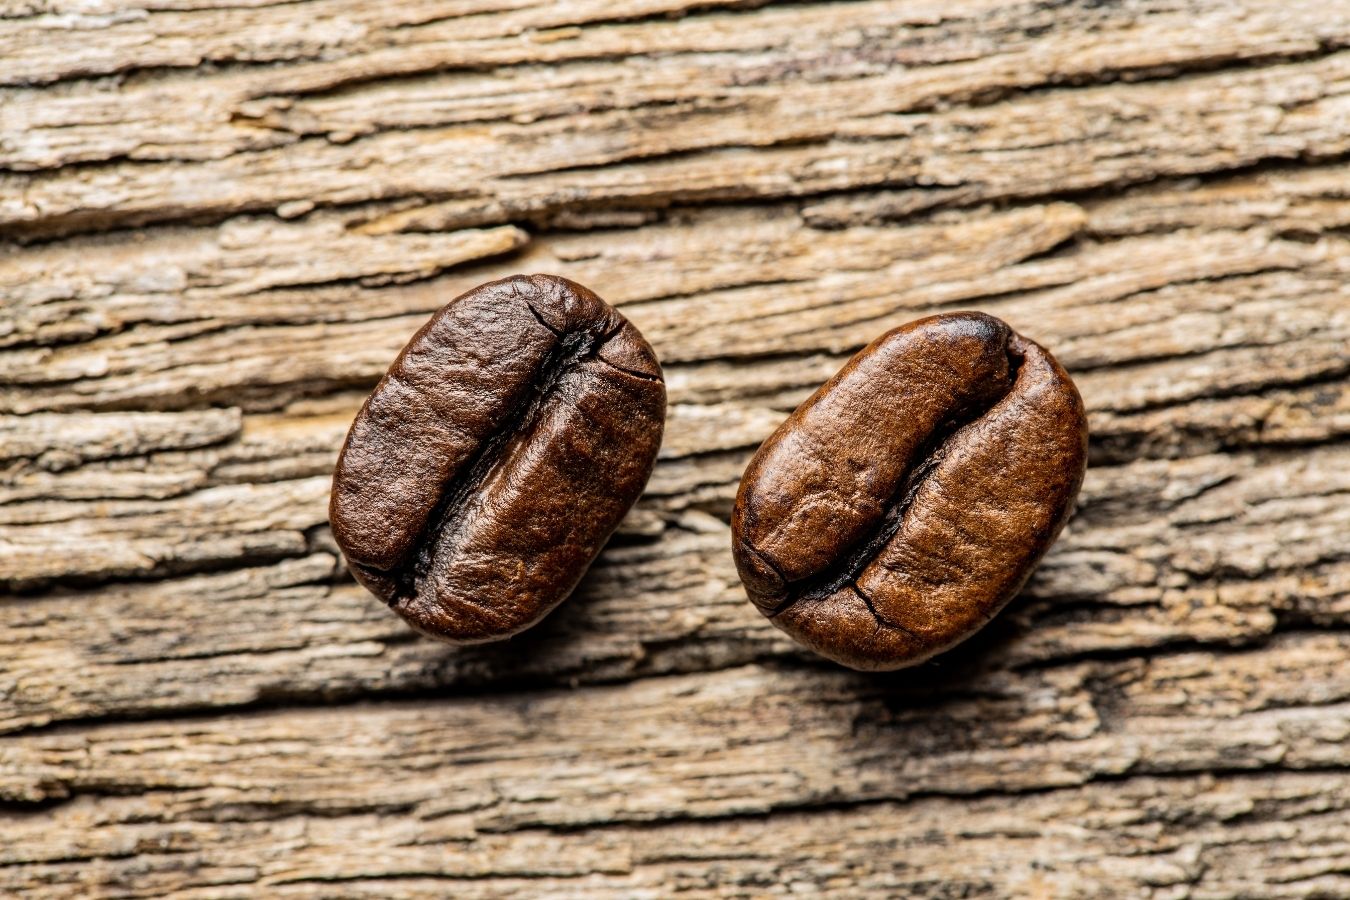 which-is-more-delicious-arabica-or-robusta-coffee